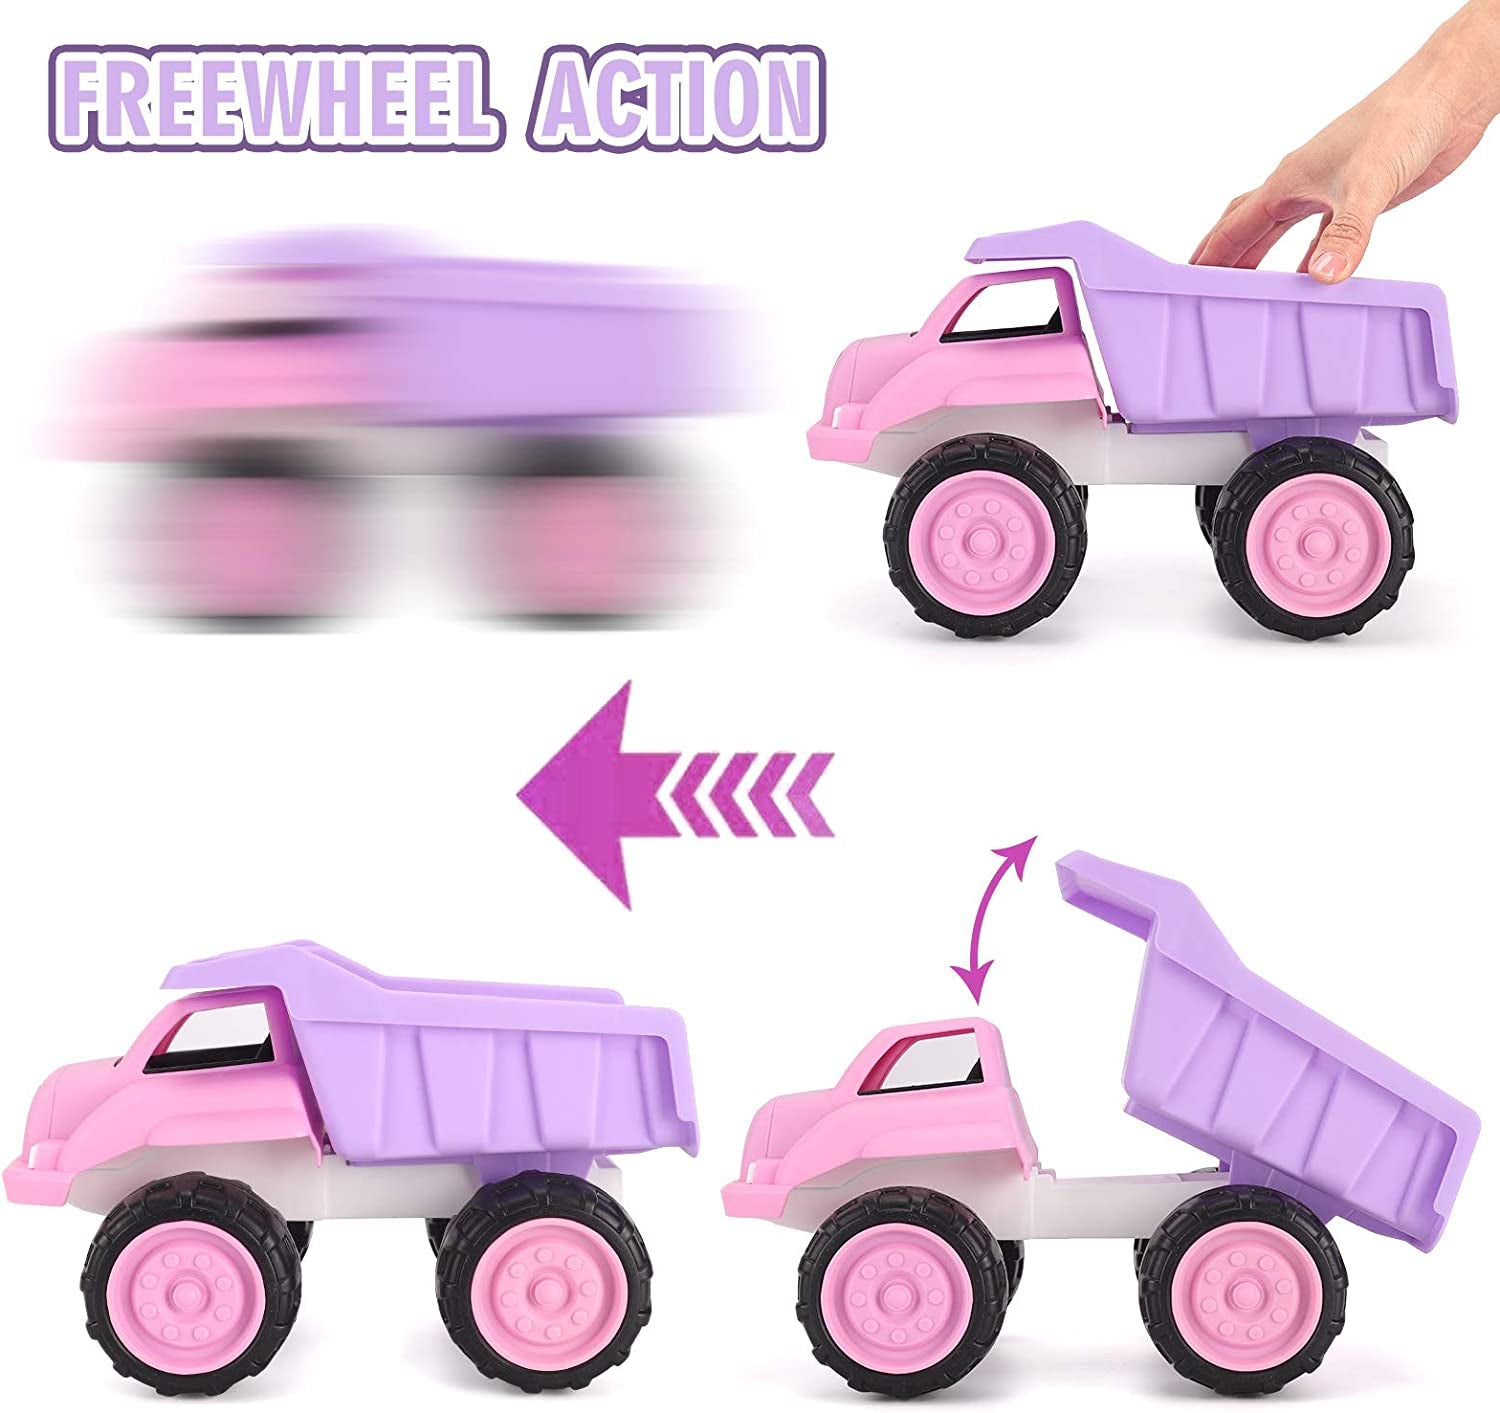 Big Plastic Dump Truck in Pink Color for Toddlers and Girls | Large Tilting Dump Bed Lorry | Free Play Toy Vehicle Indoors and Outdoors Imaginative Play